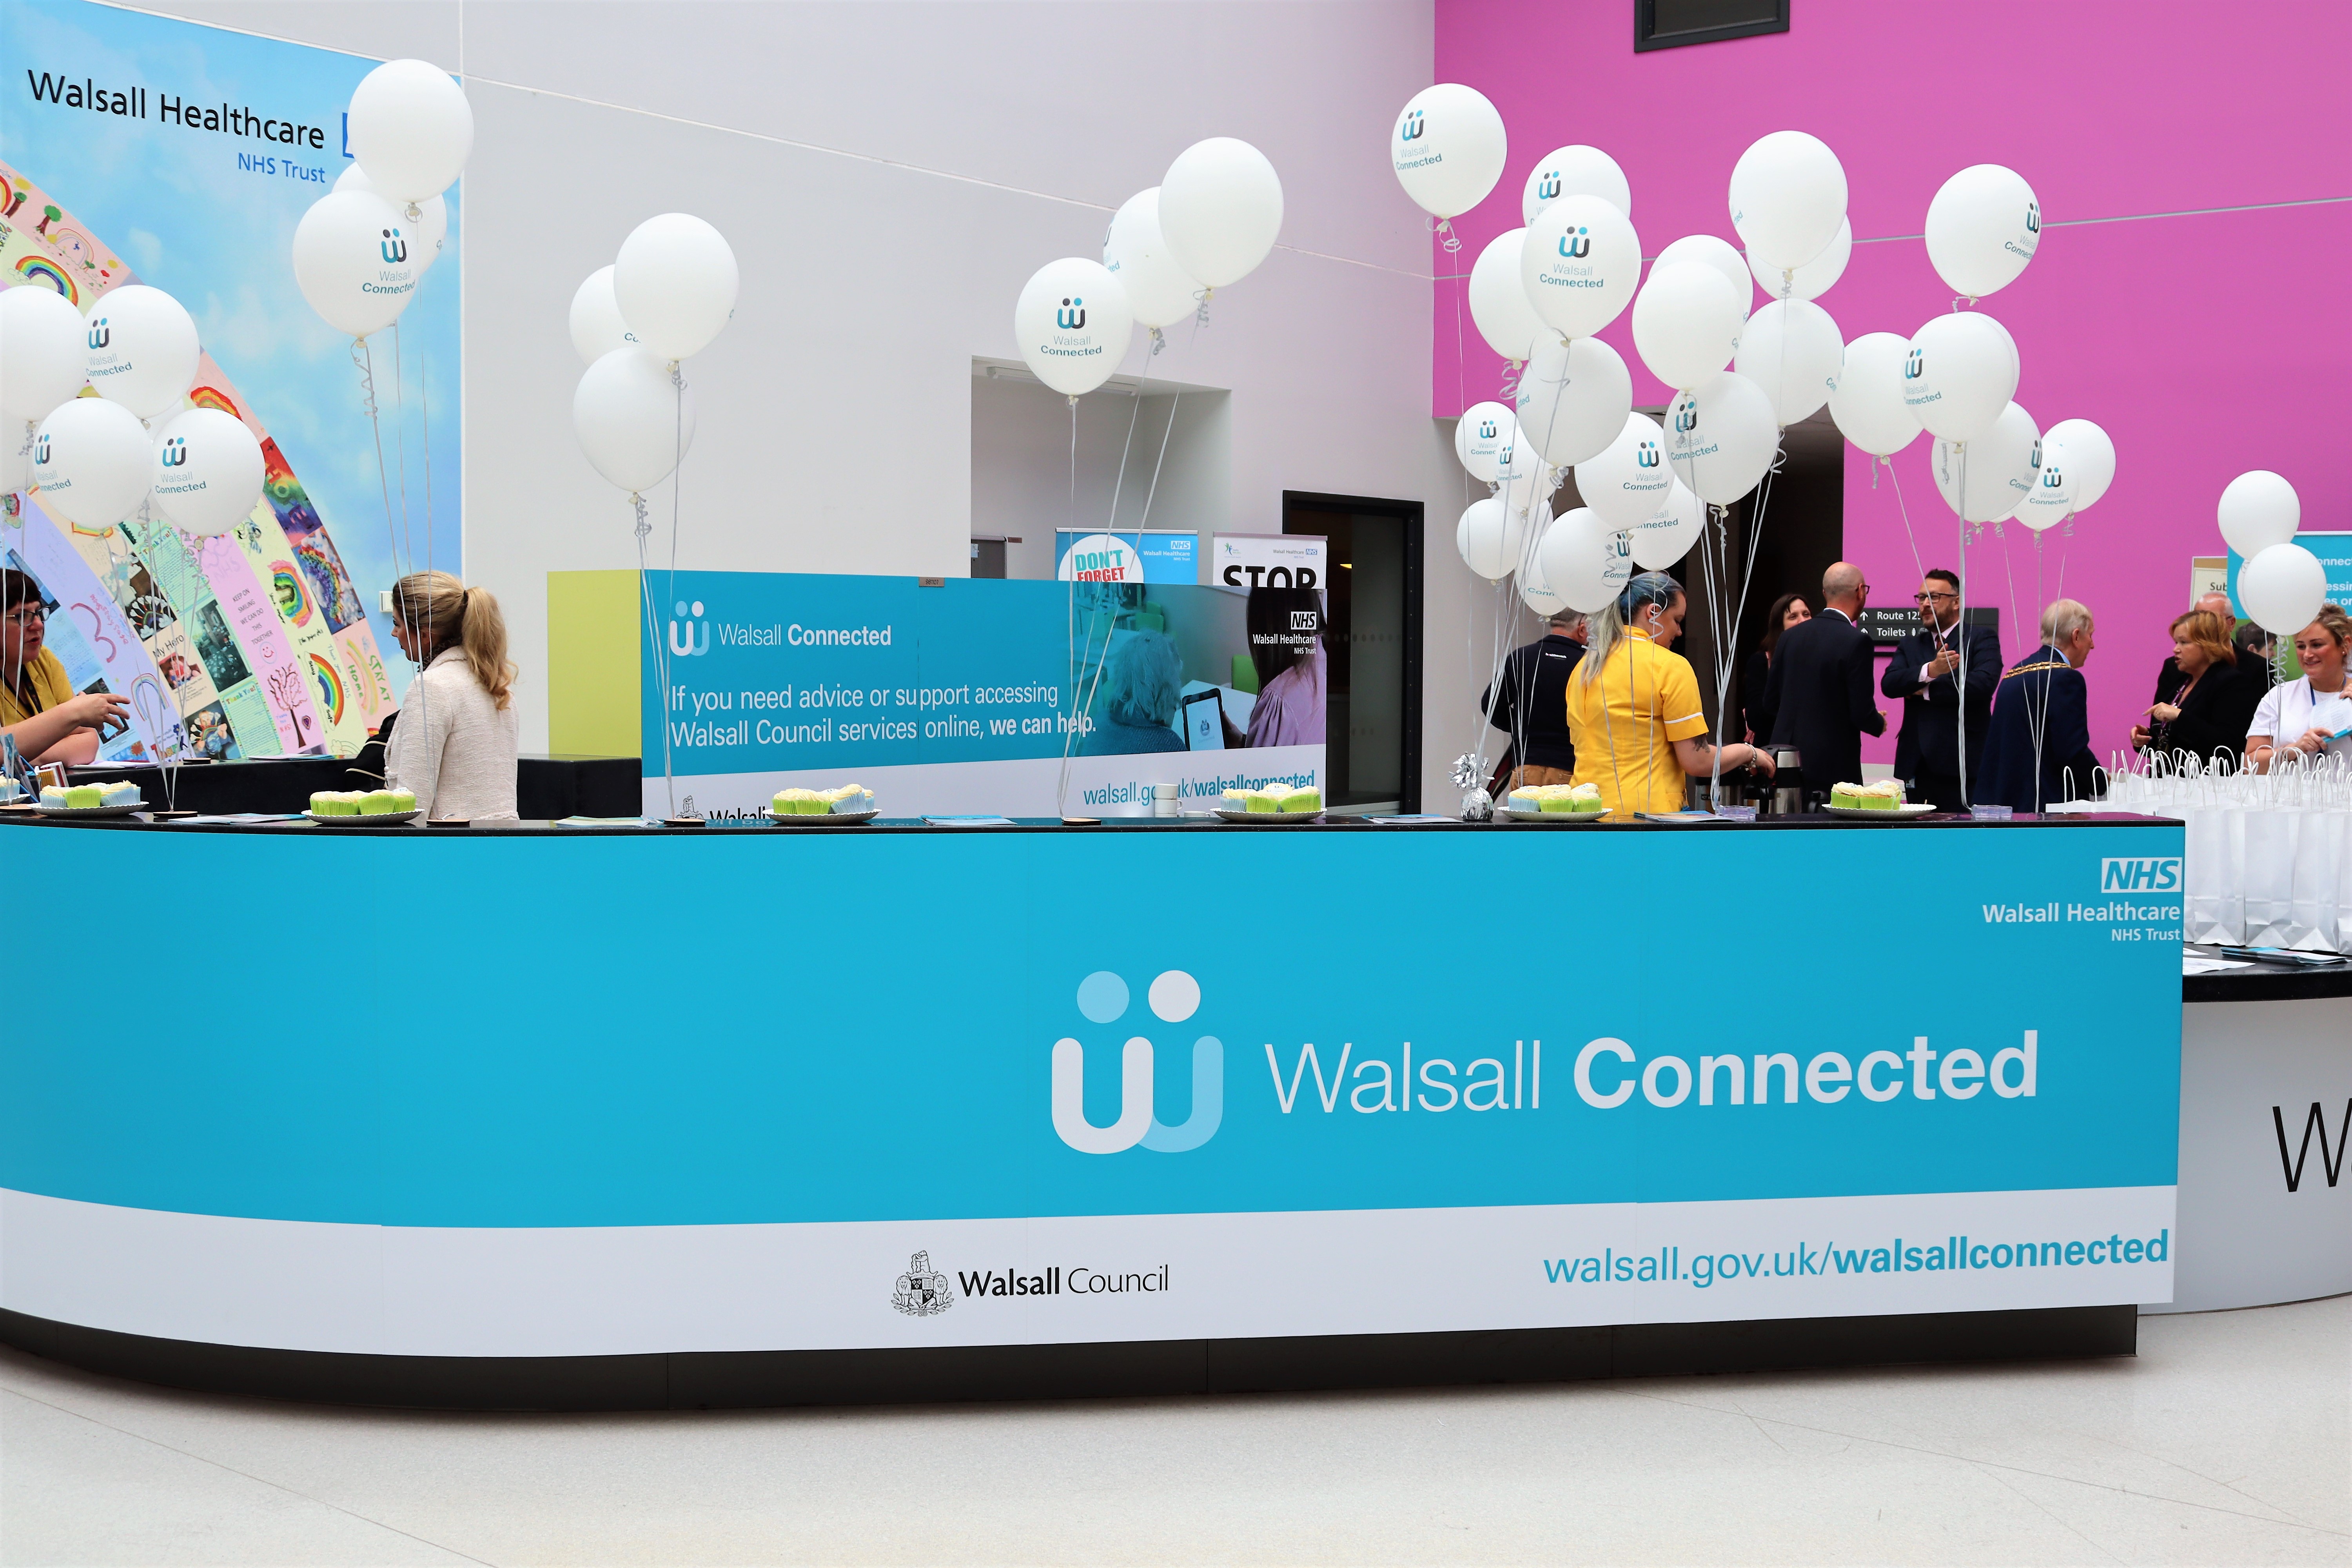 Walsall Connected